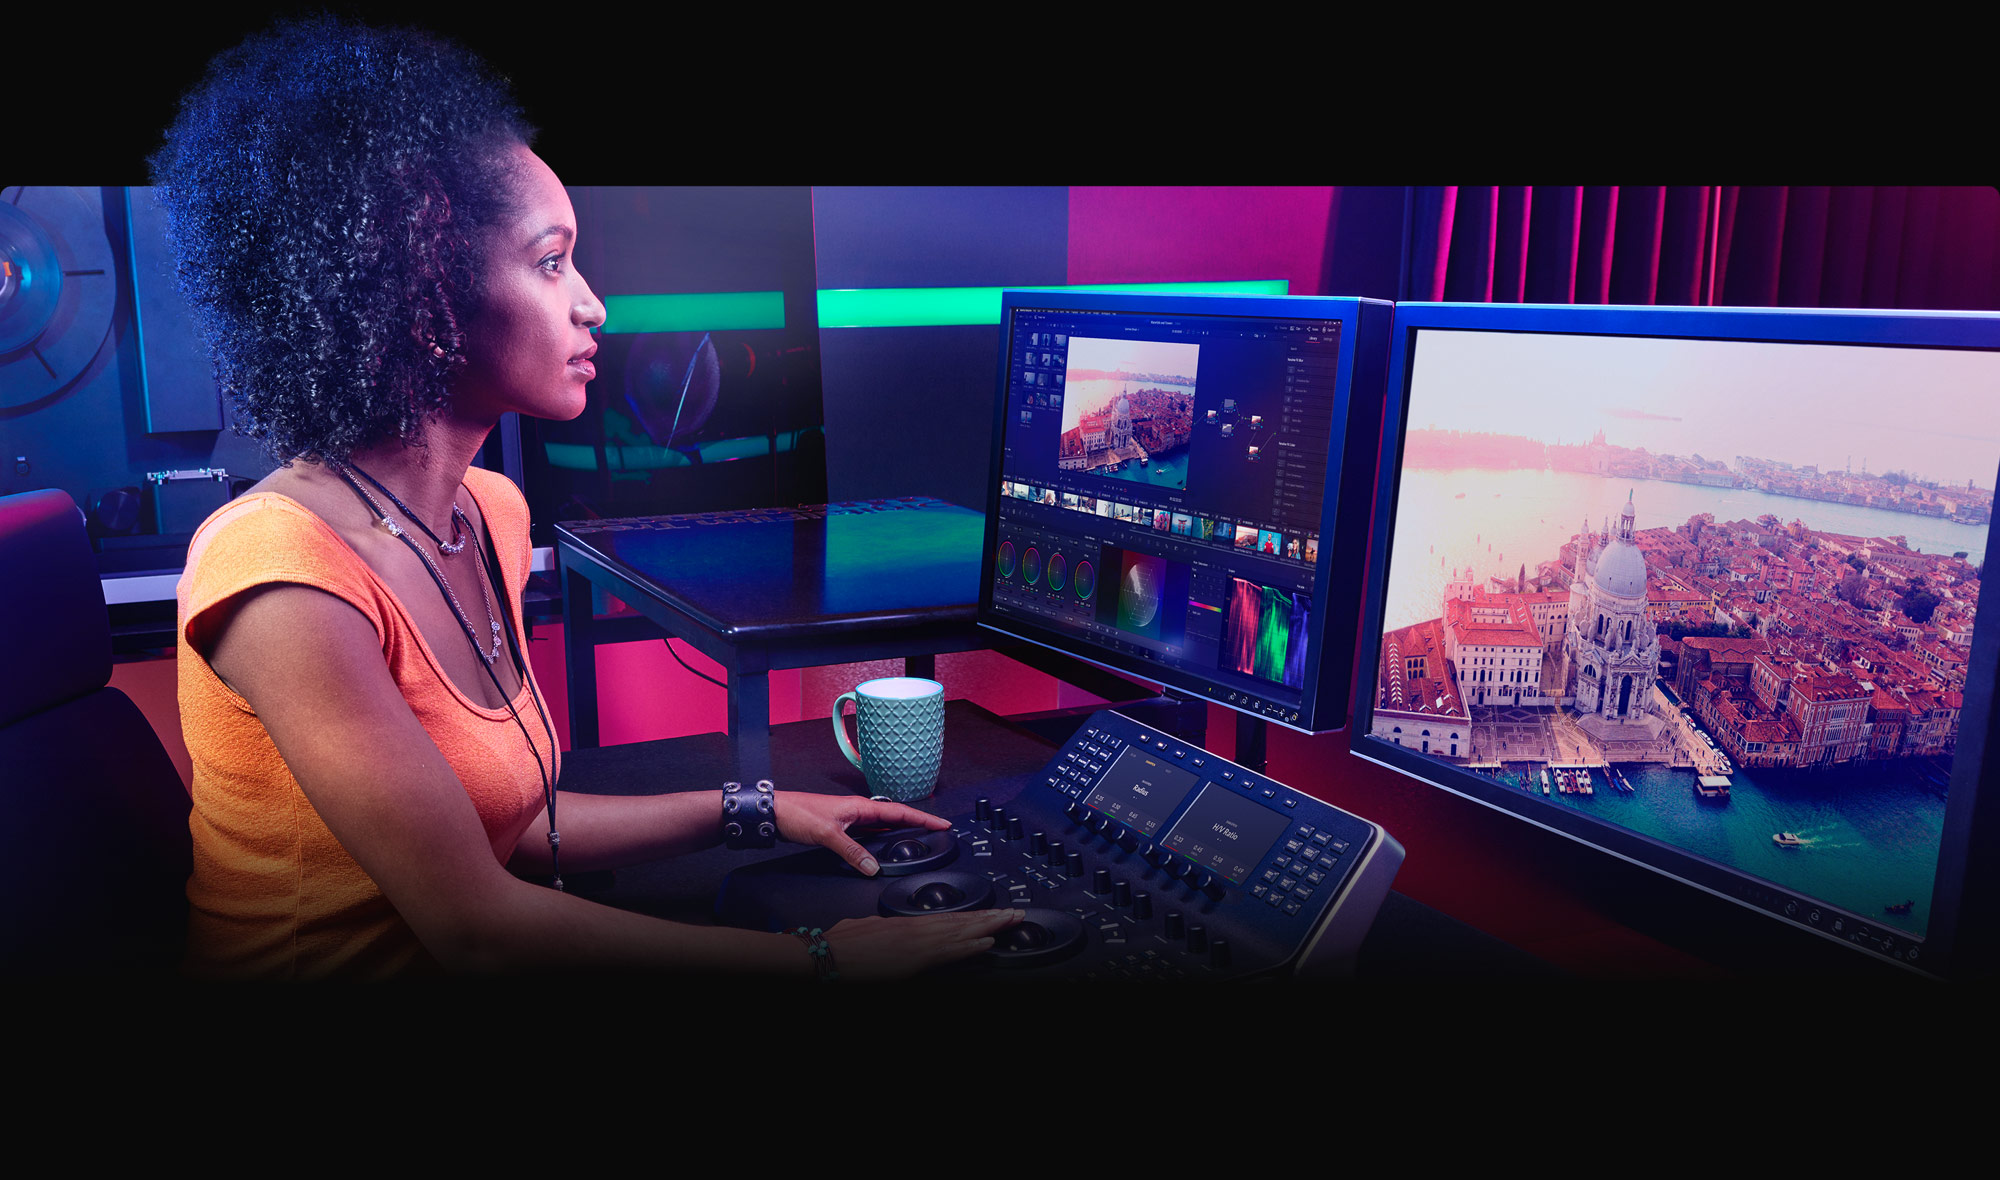 A screenshot of DaVinci Resolve, one of the best video editing tools available in the market.